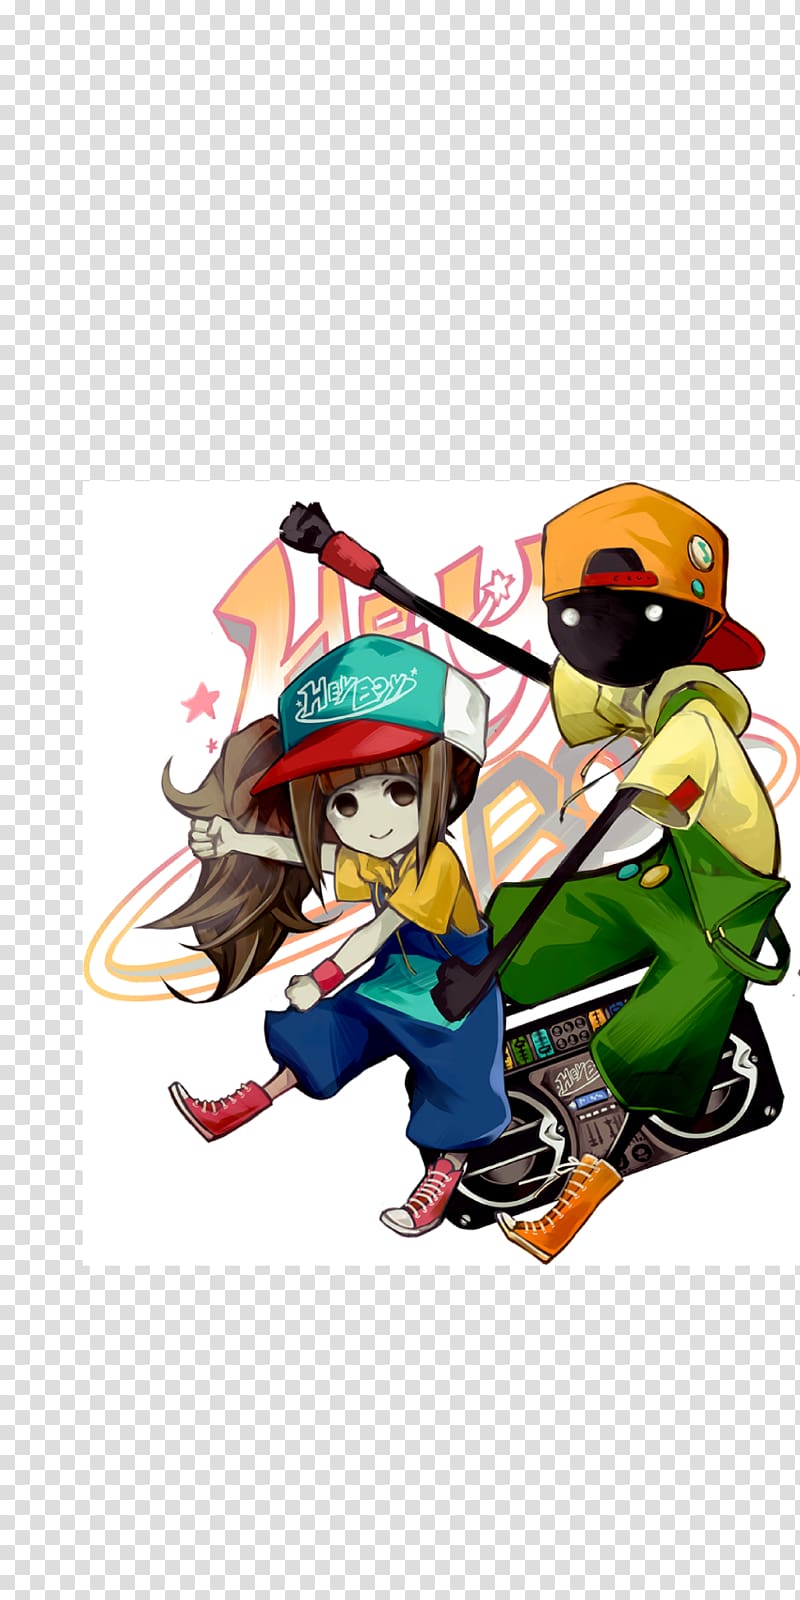 Deemo Video Games Hey Boy Music video game, Deemo transparent background PNG clipart